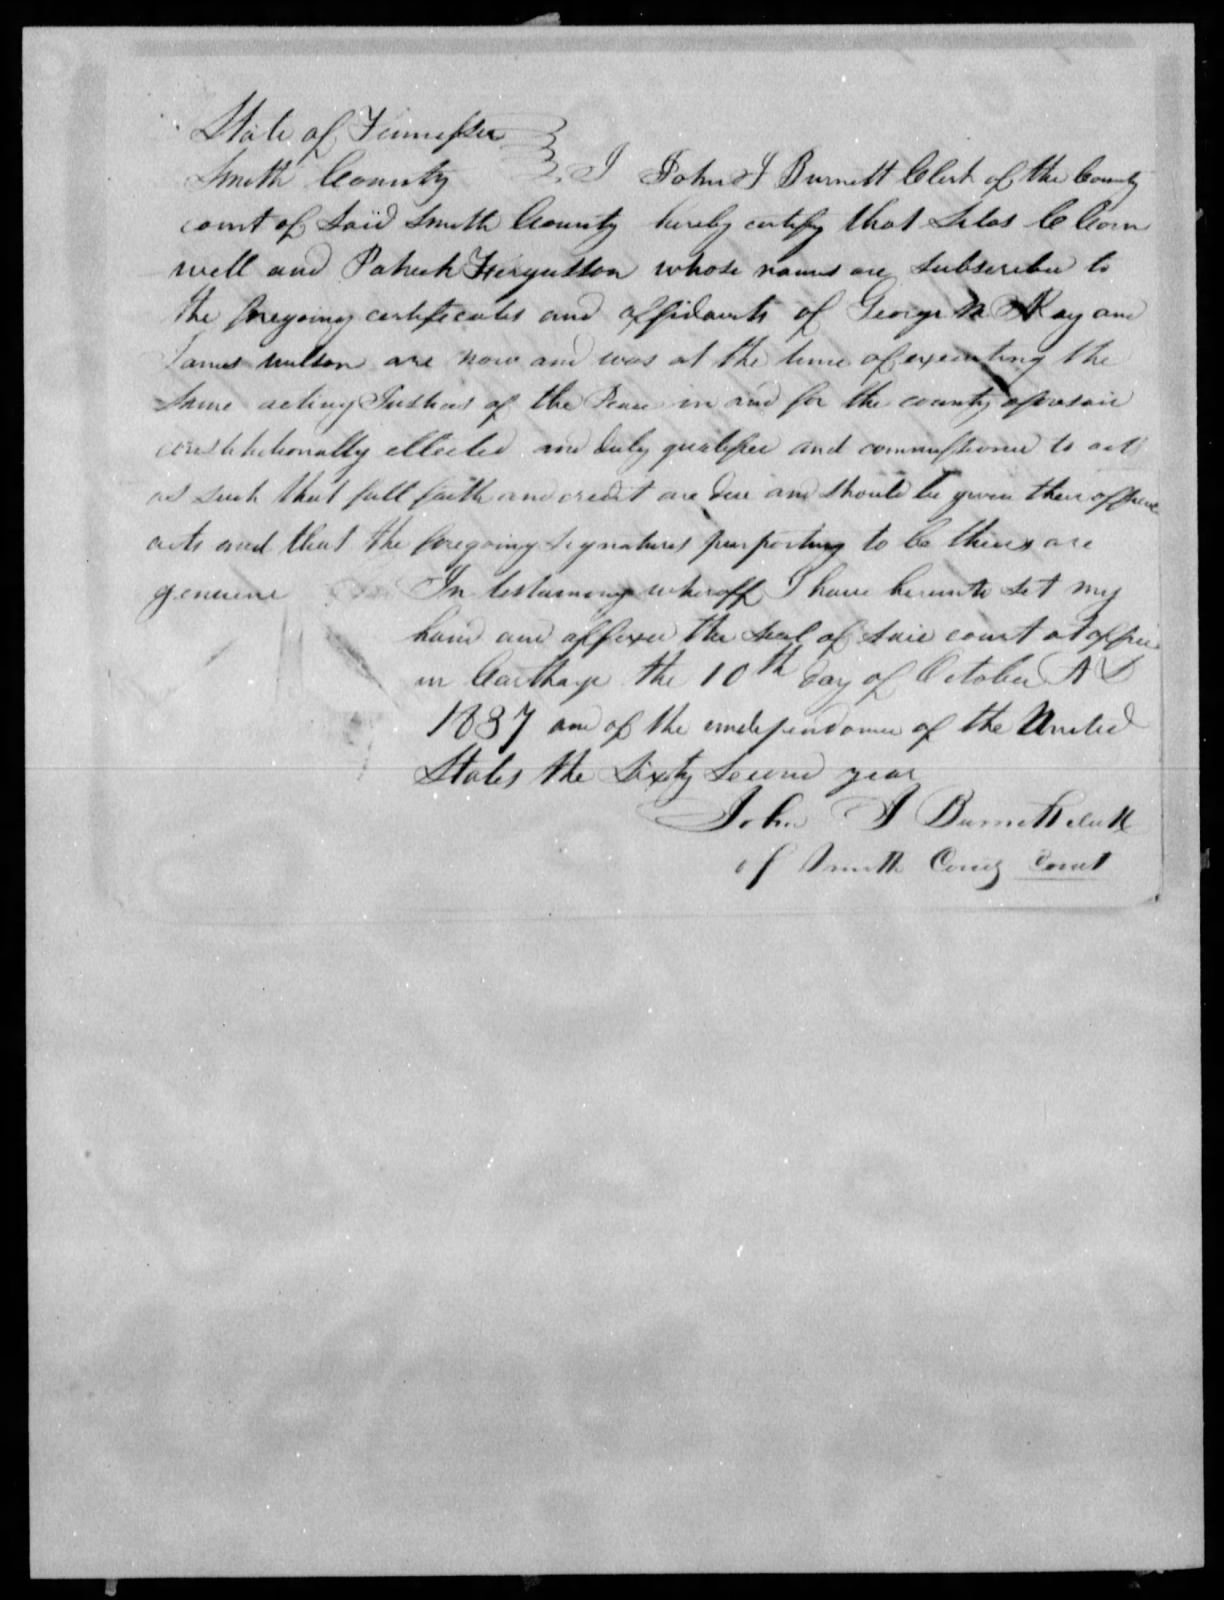 Affidavit of George M. Ray in support of a Pension Claim for Lydia Ray, circa 11 September 1837, page 4